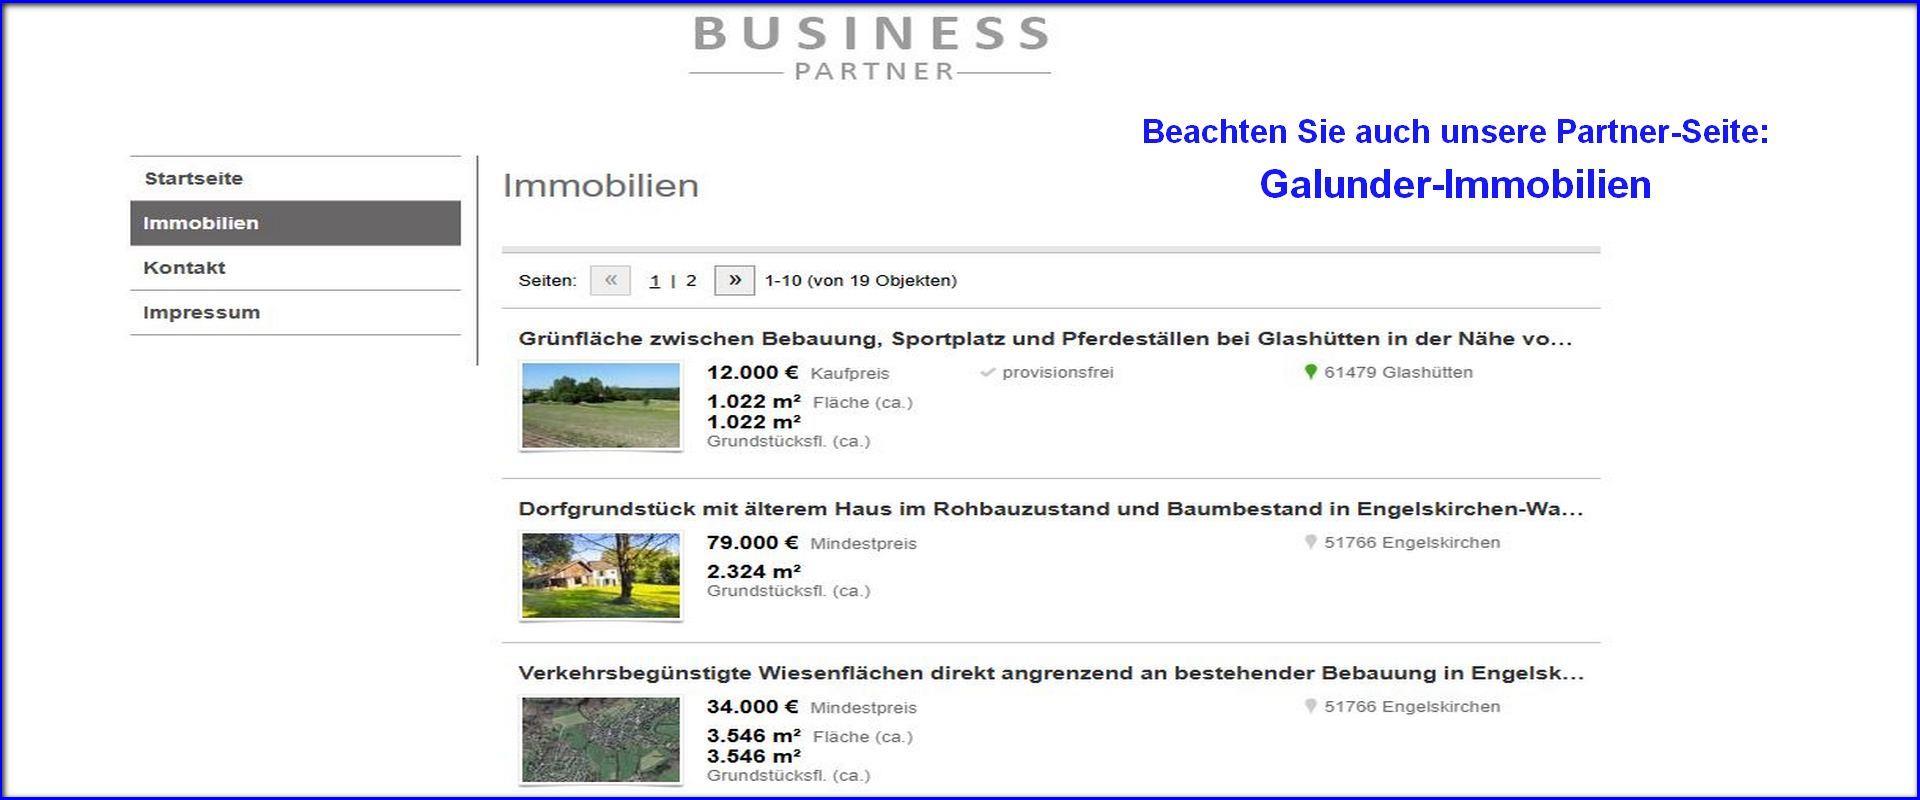 Galunder-Immobilien